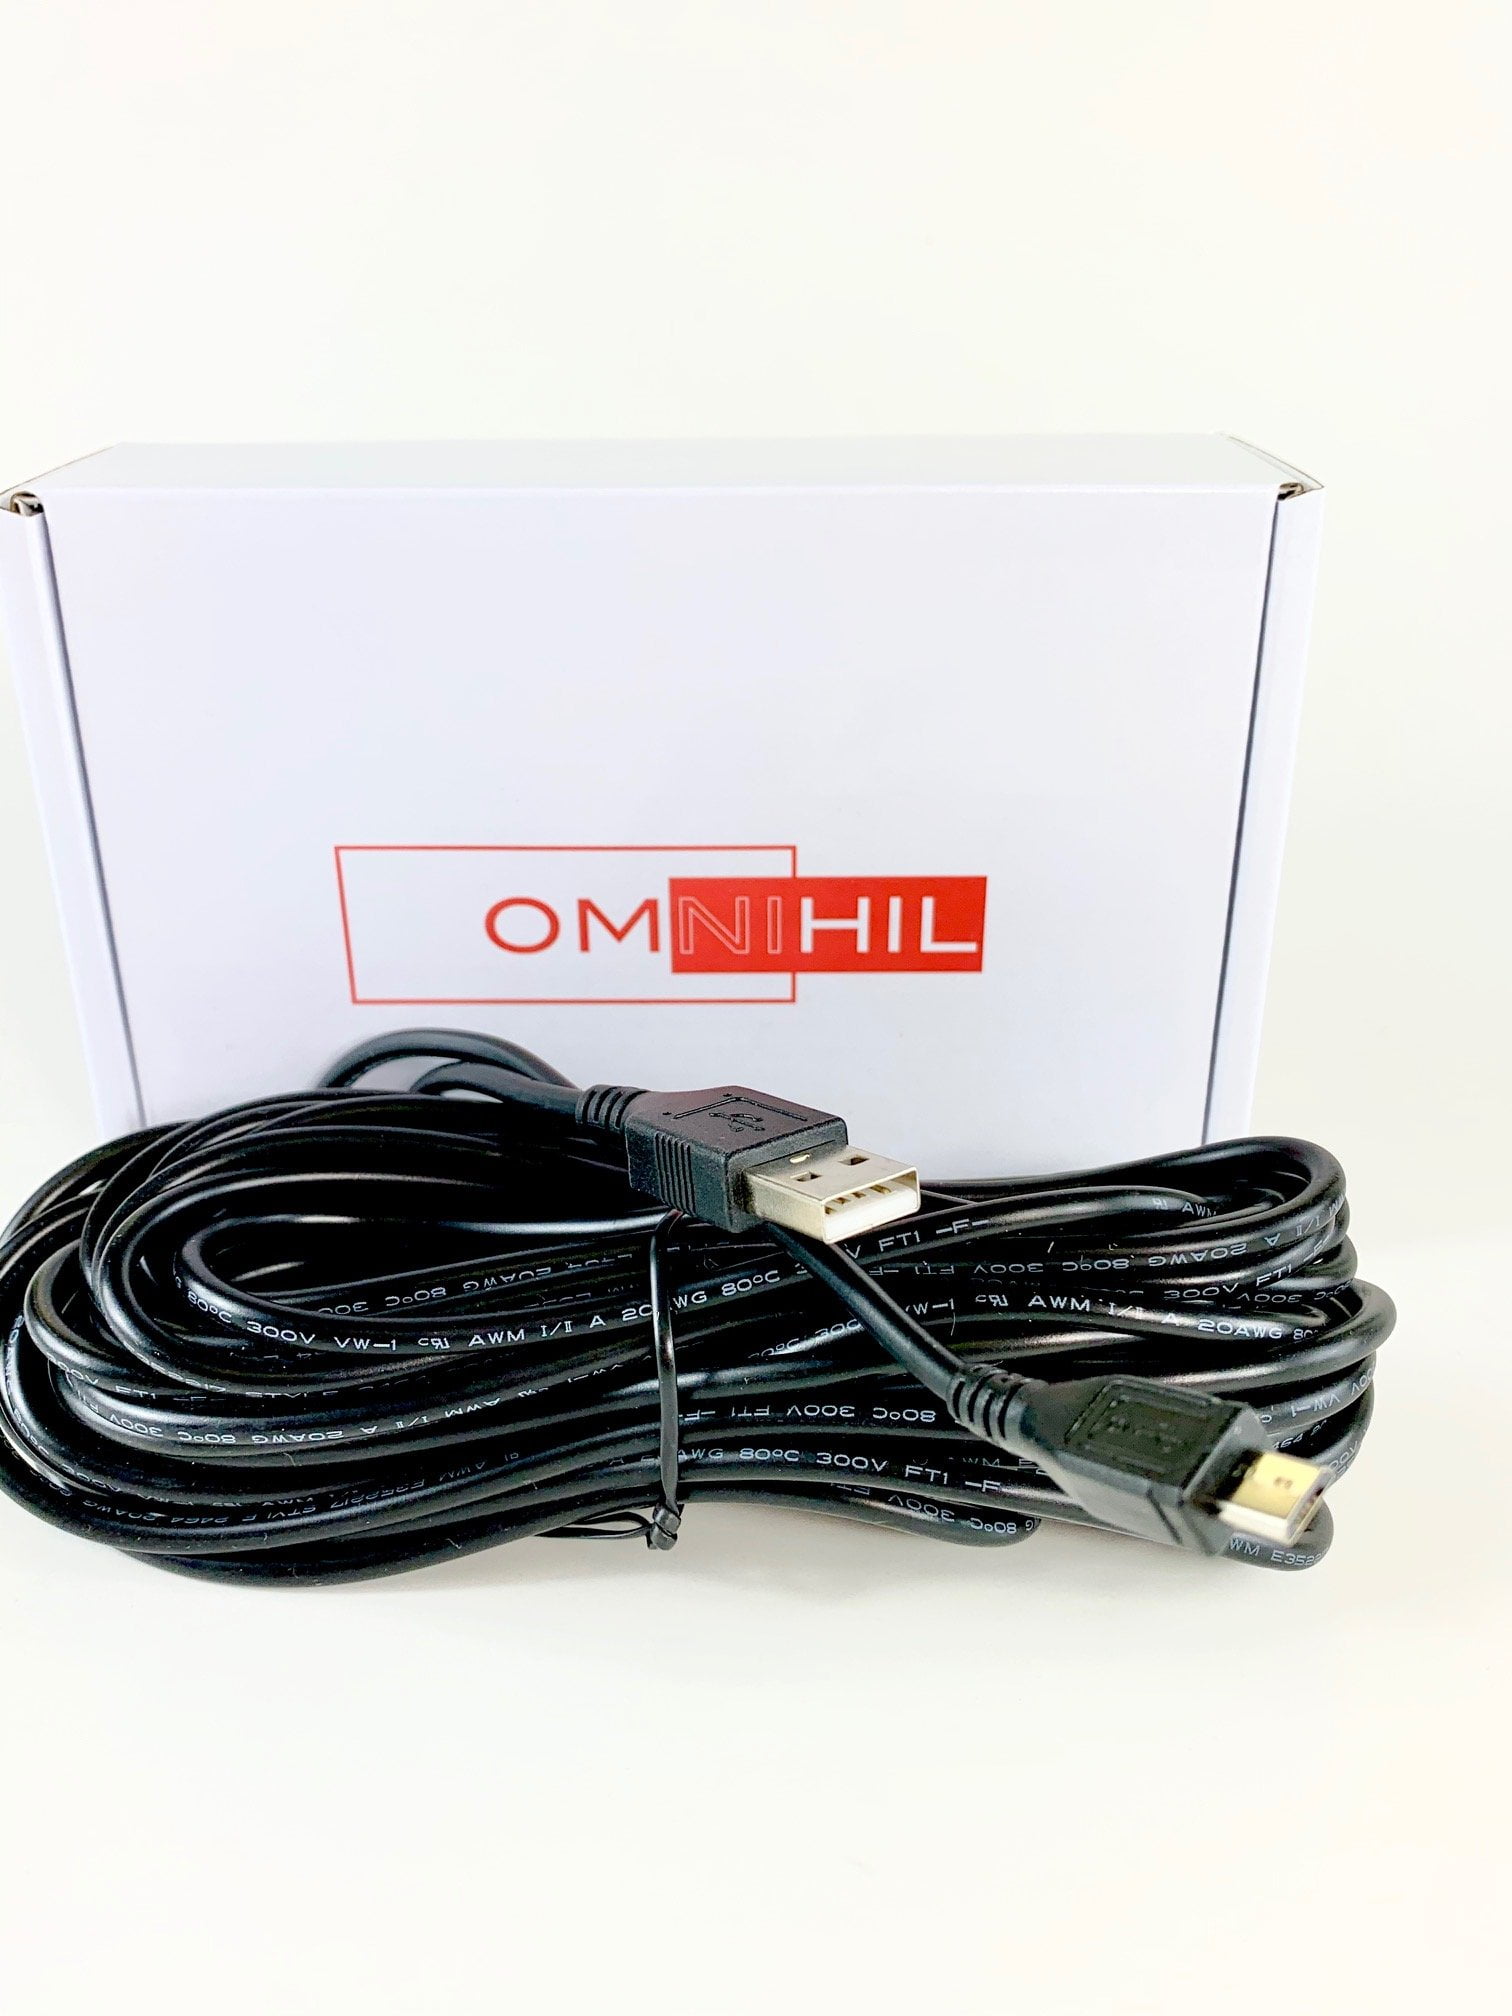 OMNIHIL 15 Feet Long High Speed USB 2.0 Cable Compatible with Sphero Bolt 